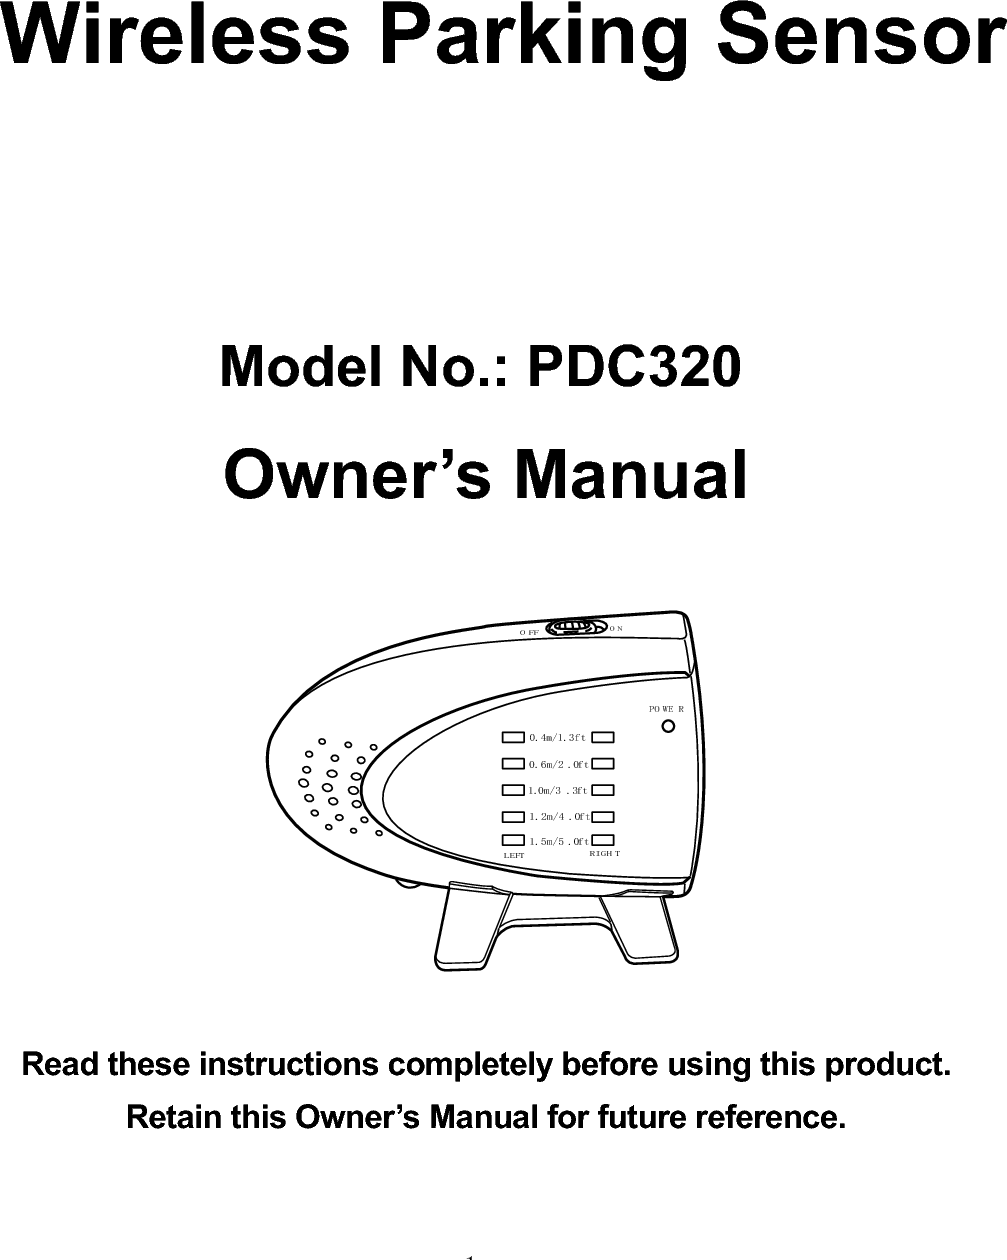 Wireless Parking SensorModel No.: PDC320Owner’s Manual32 :( 5PIWP IWP IWP IWP IW/()7 5,*+ 72))21Read these instructions completely before using this product.Retain this Owner’s Manual for future reference.